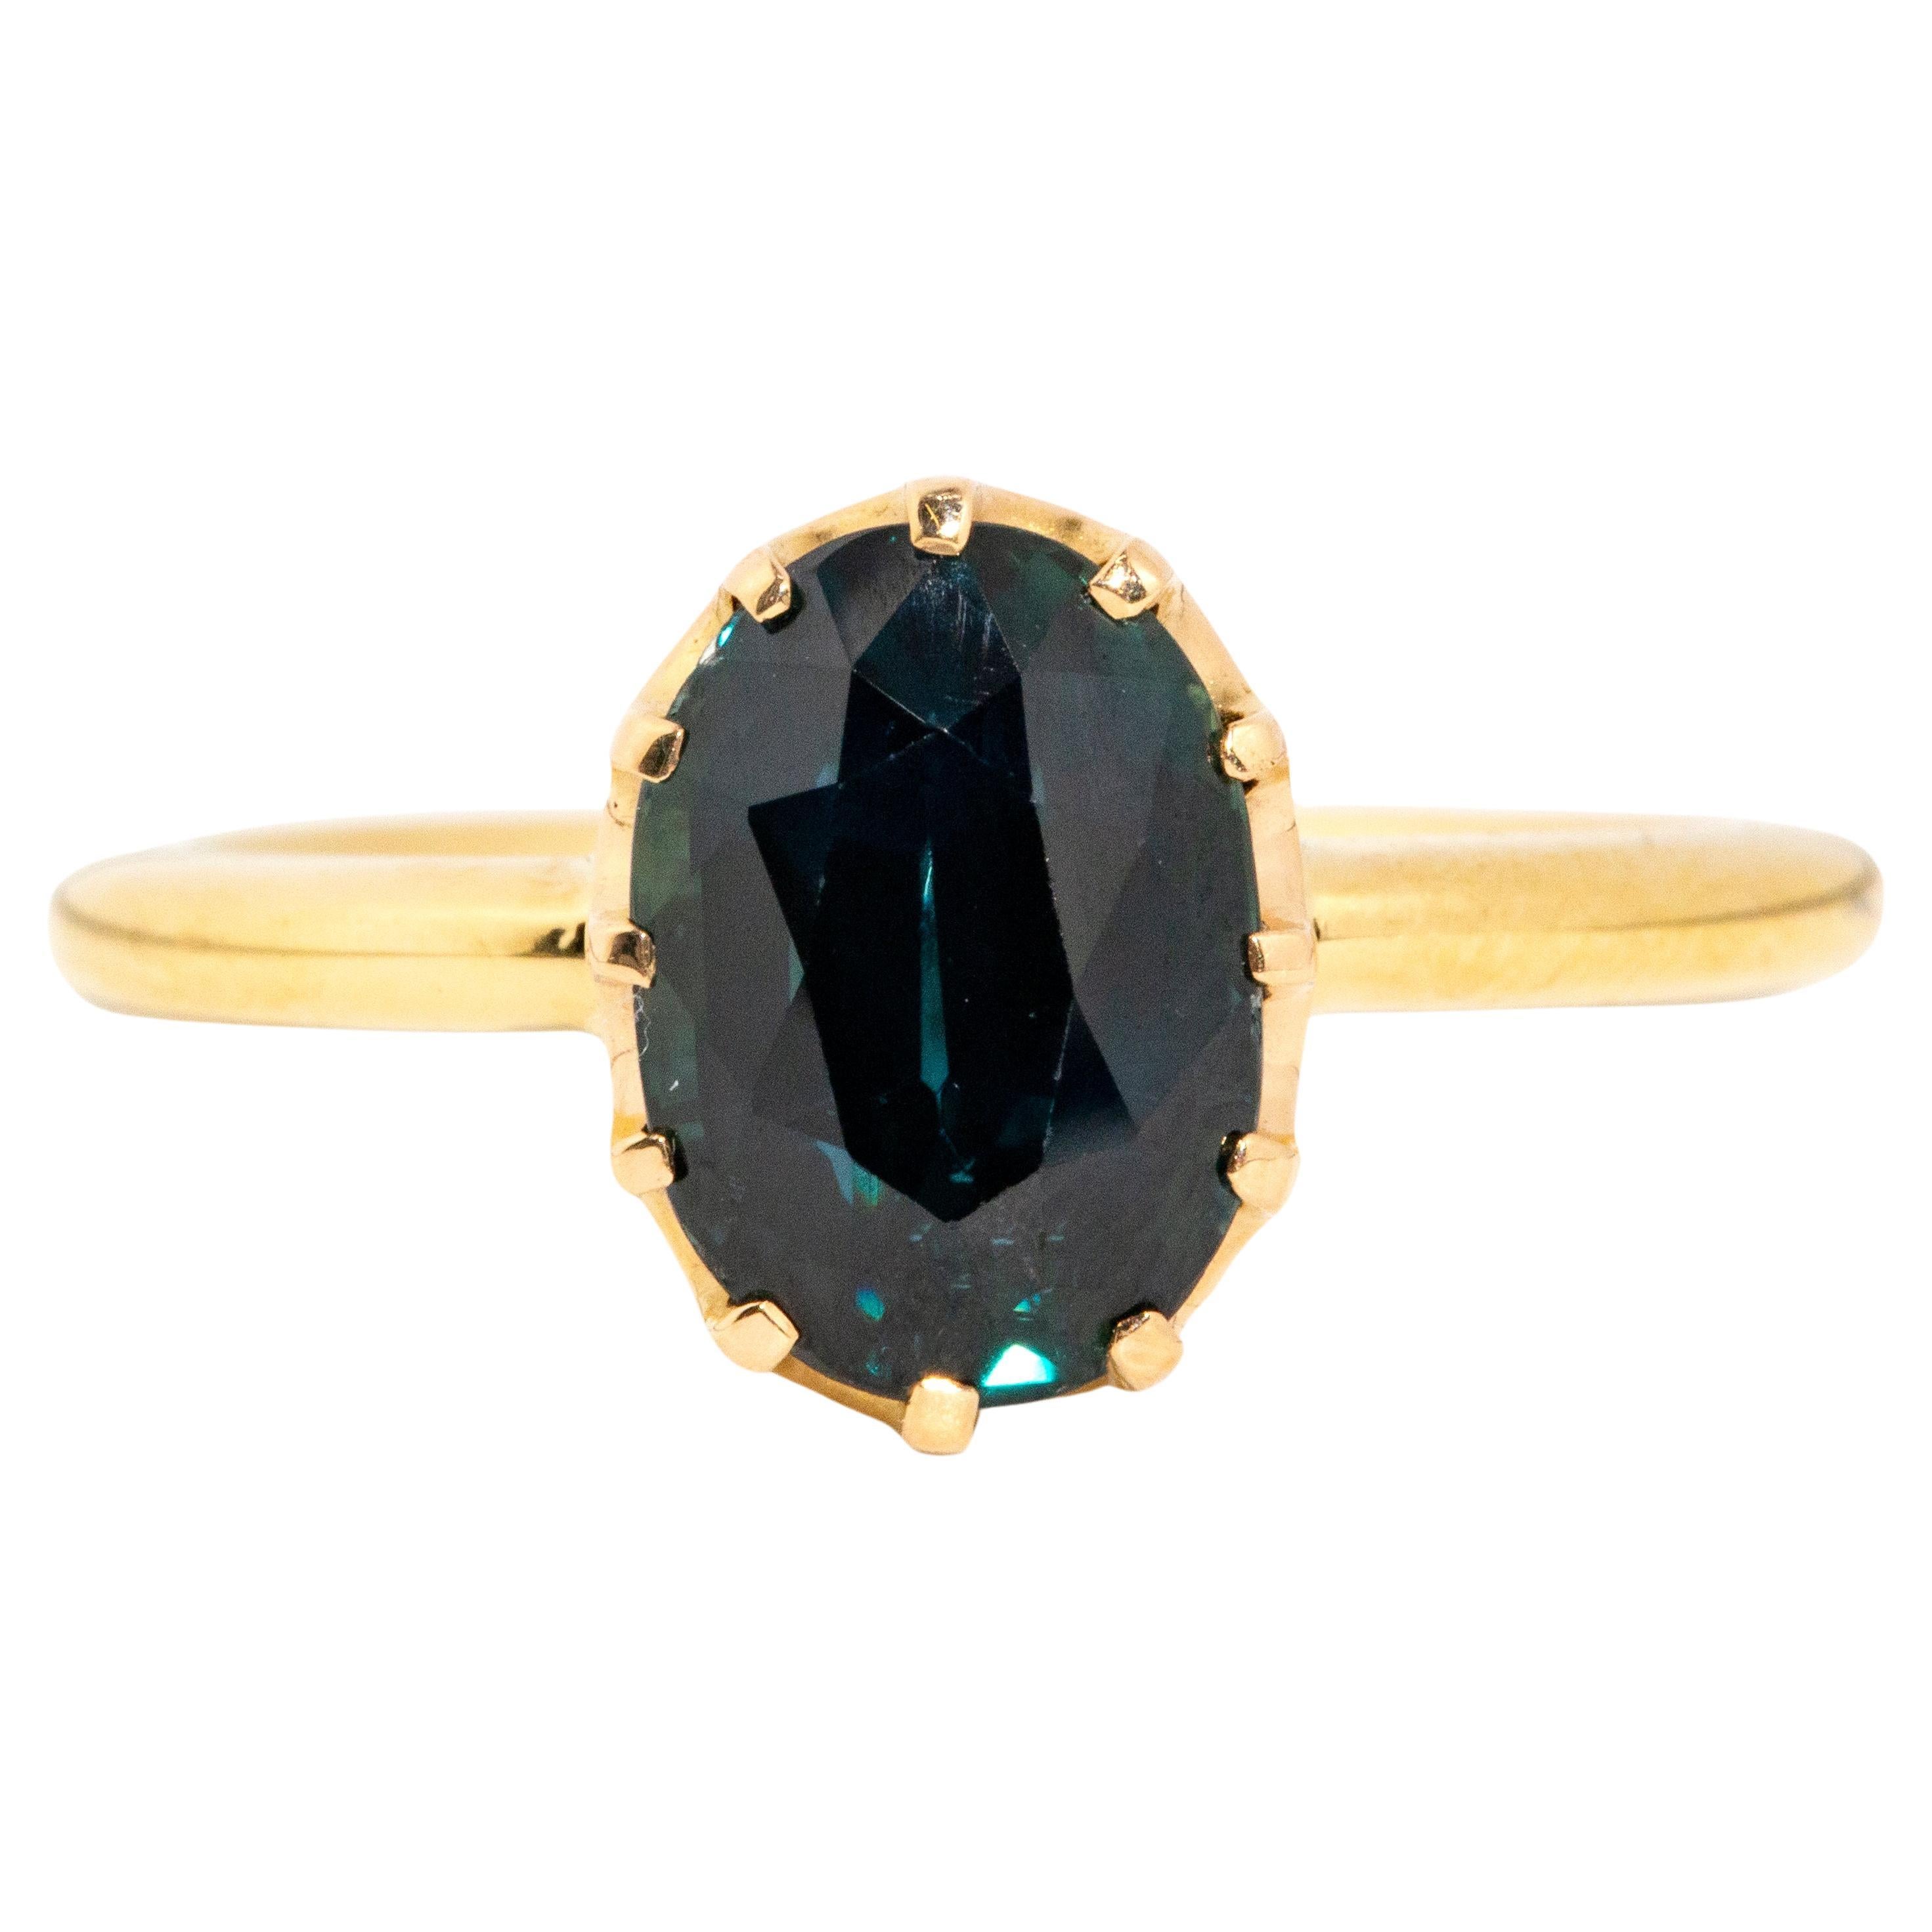 Reinvented Vintage 1930s 3.12 Carat Oval Teal Sapphire Ring 18 Carat Yellow Gold